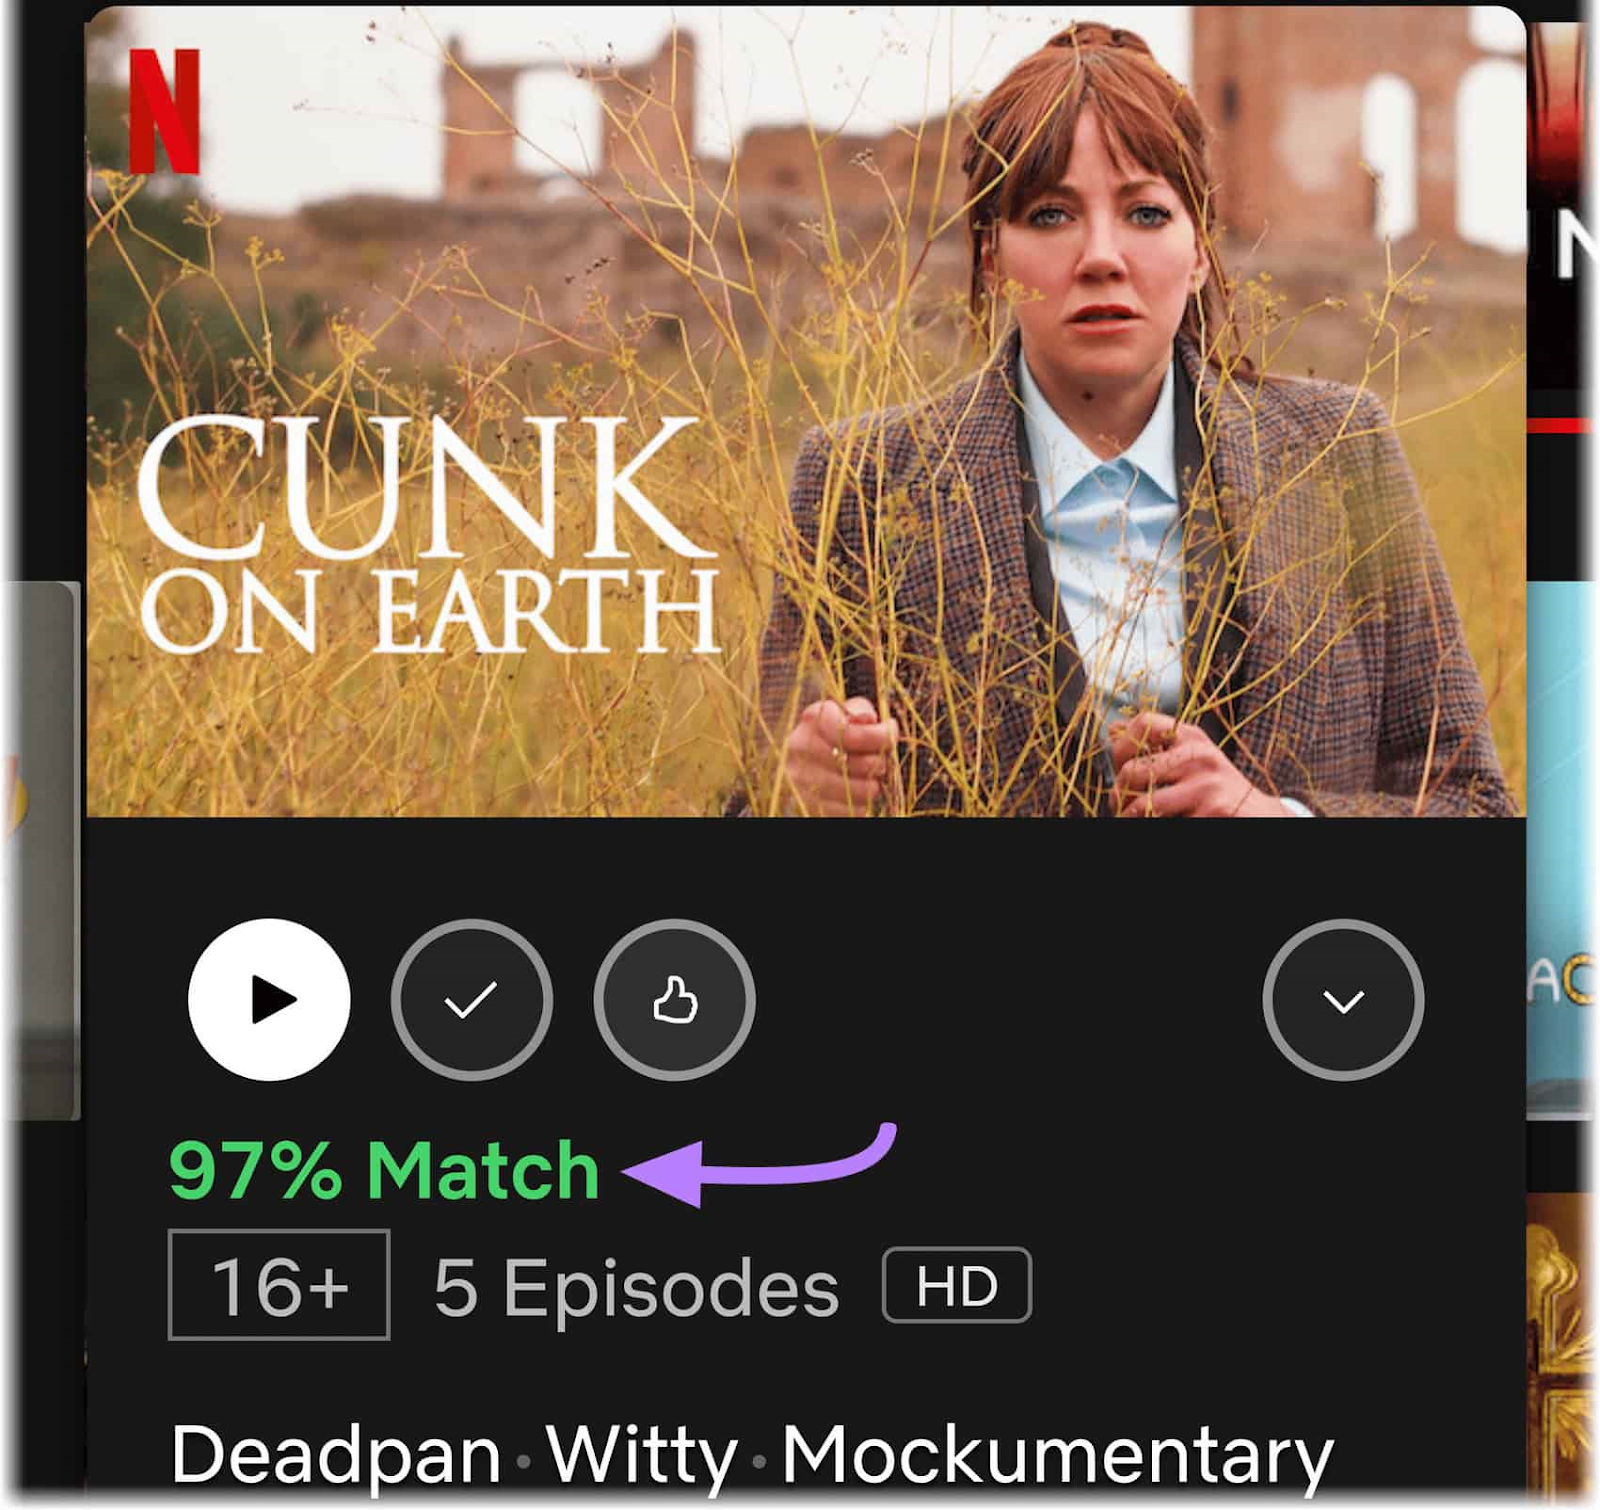 An example of Netflix's suggestion showing "97% match"